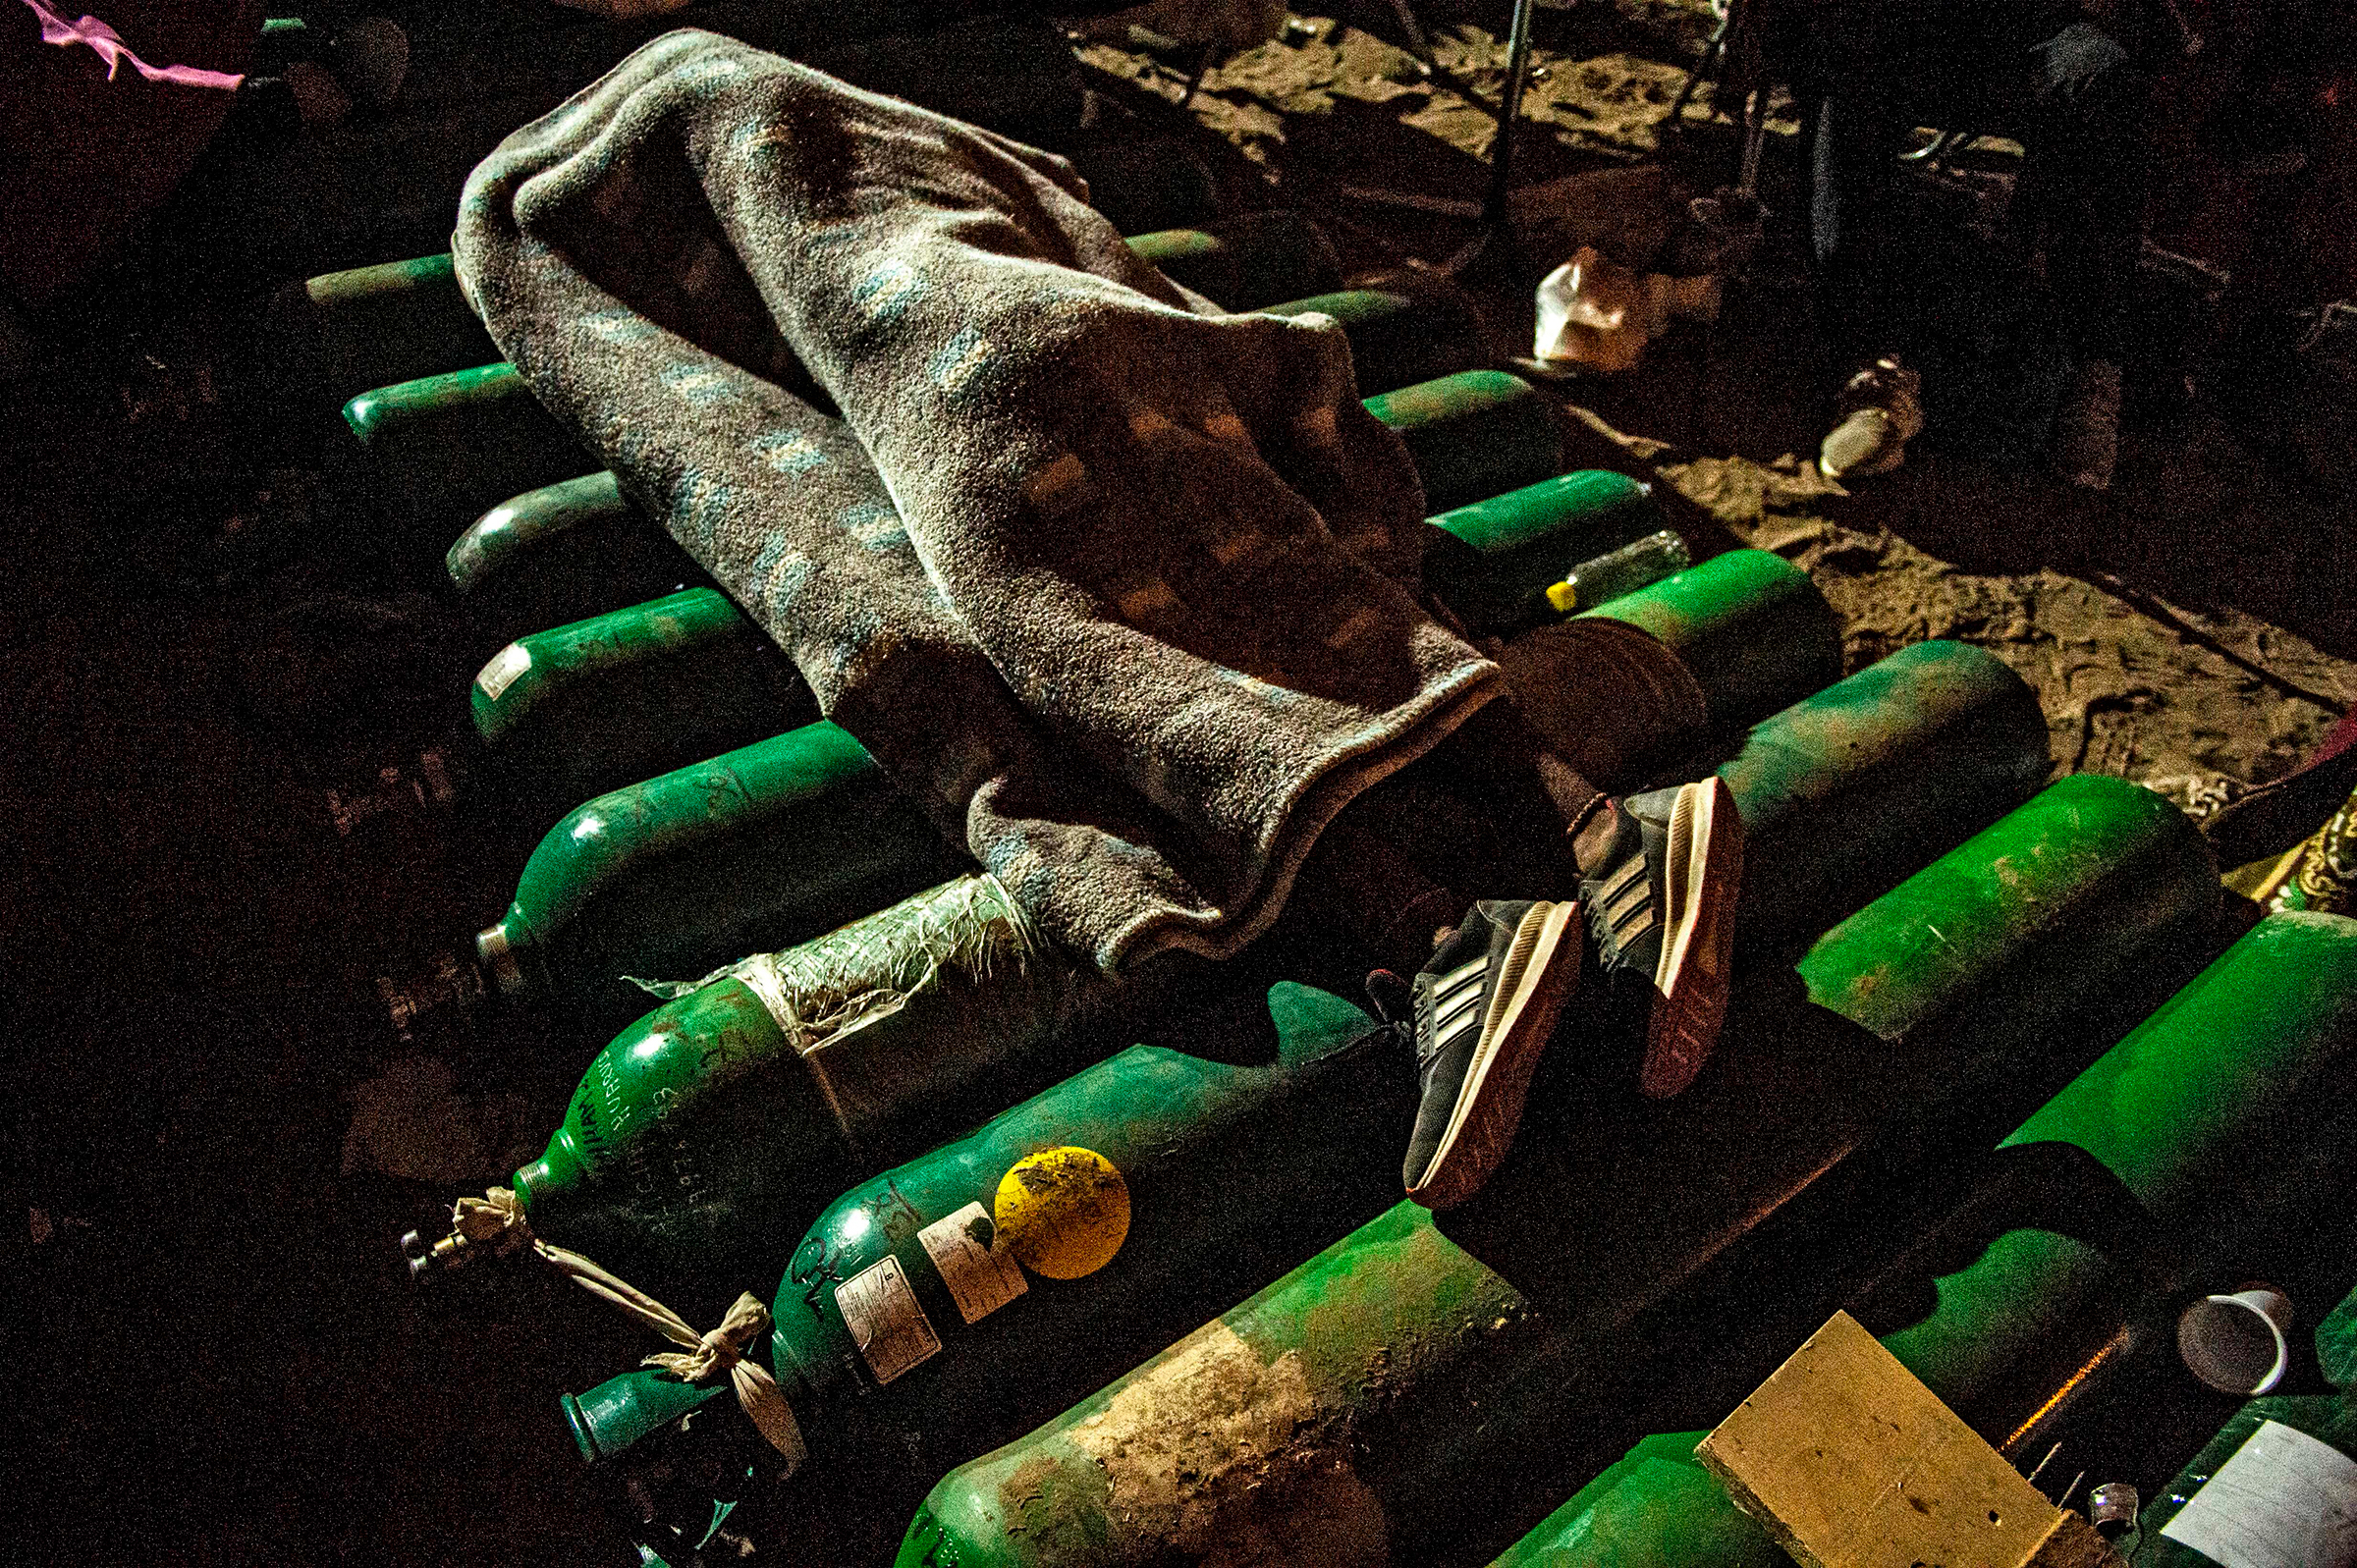 A person sleeps on empty oxygen cylinders while waiting to refill them on the outskirts of Lima on Feb. 25. Relatives of COVID-19 patients were desperate for oxygen to keep their loved ones alive during a fierce second wave of the pandemic in Peru. (Ernesto Benavides—AFP/Getty Images)